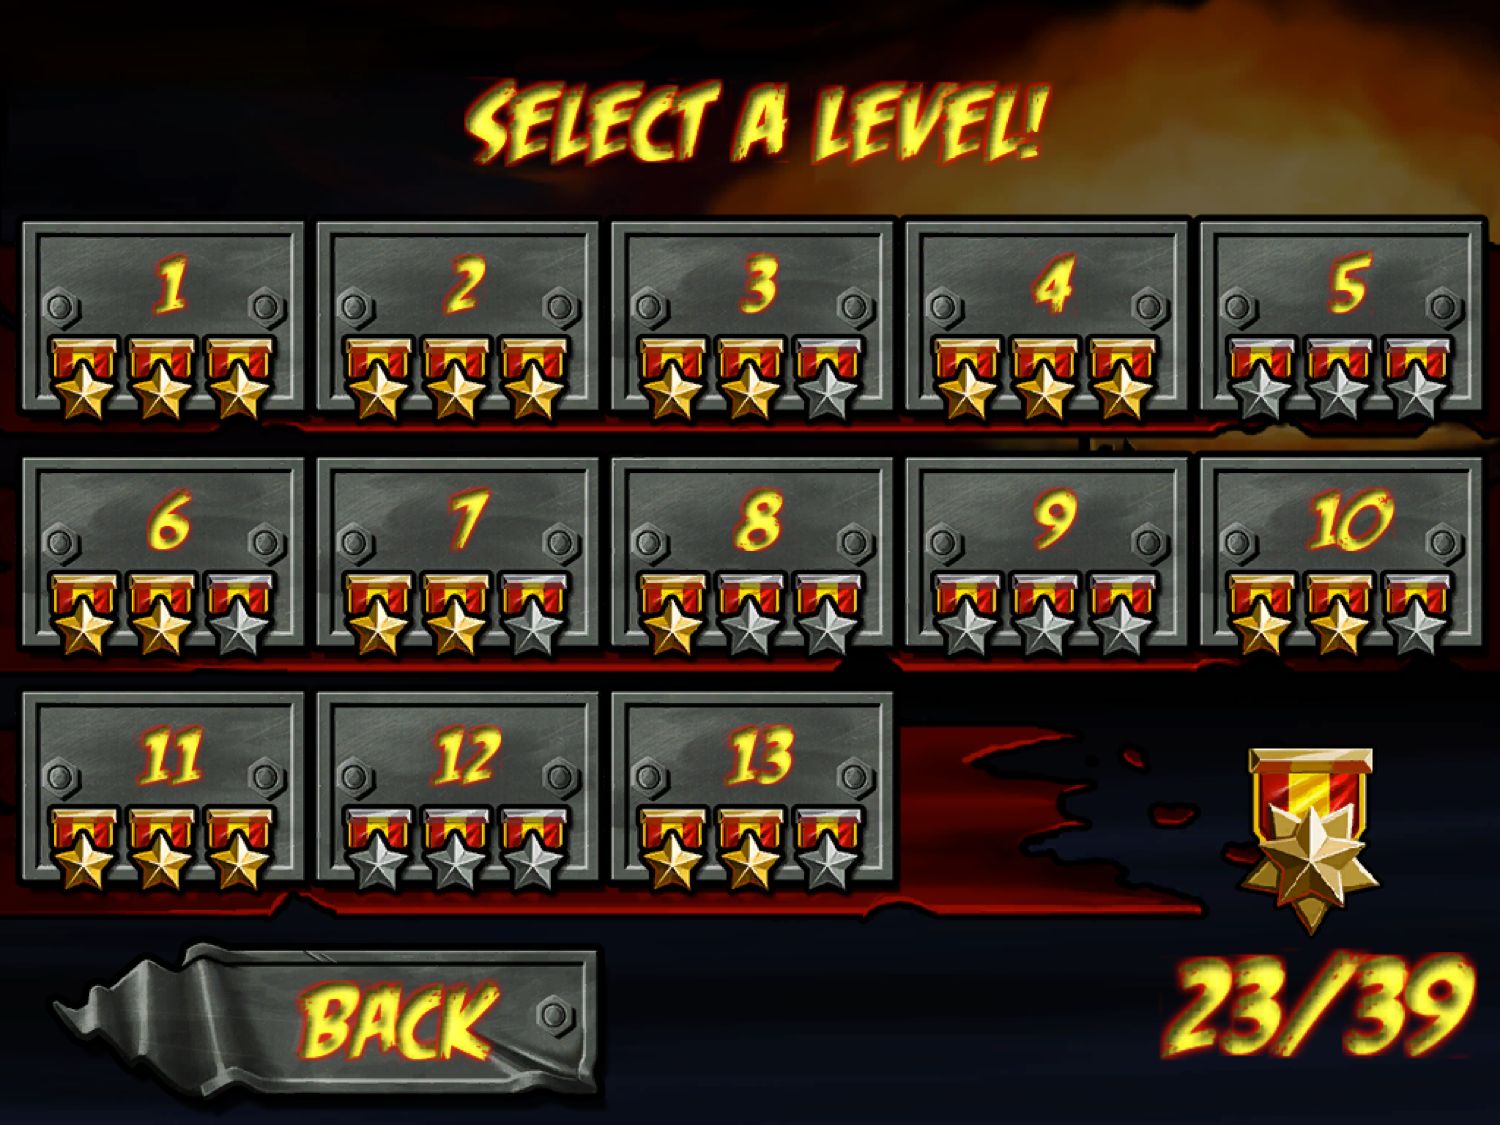 Zombie Pirate Robot Attack 1.0 : Level Selection